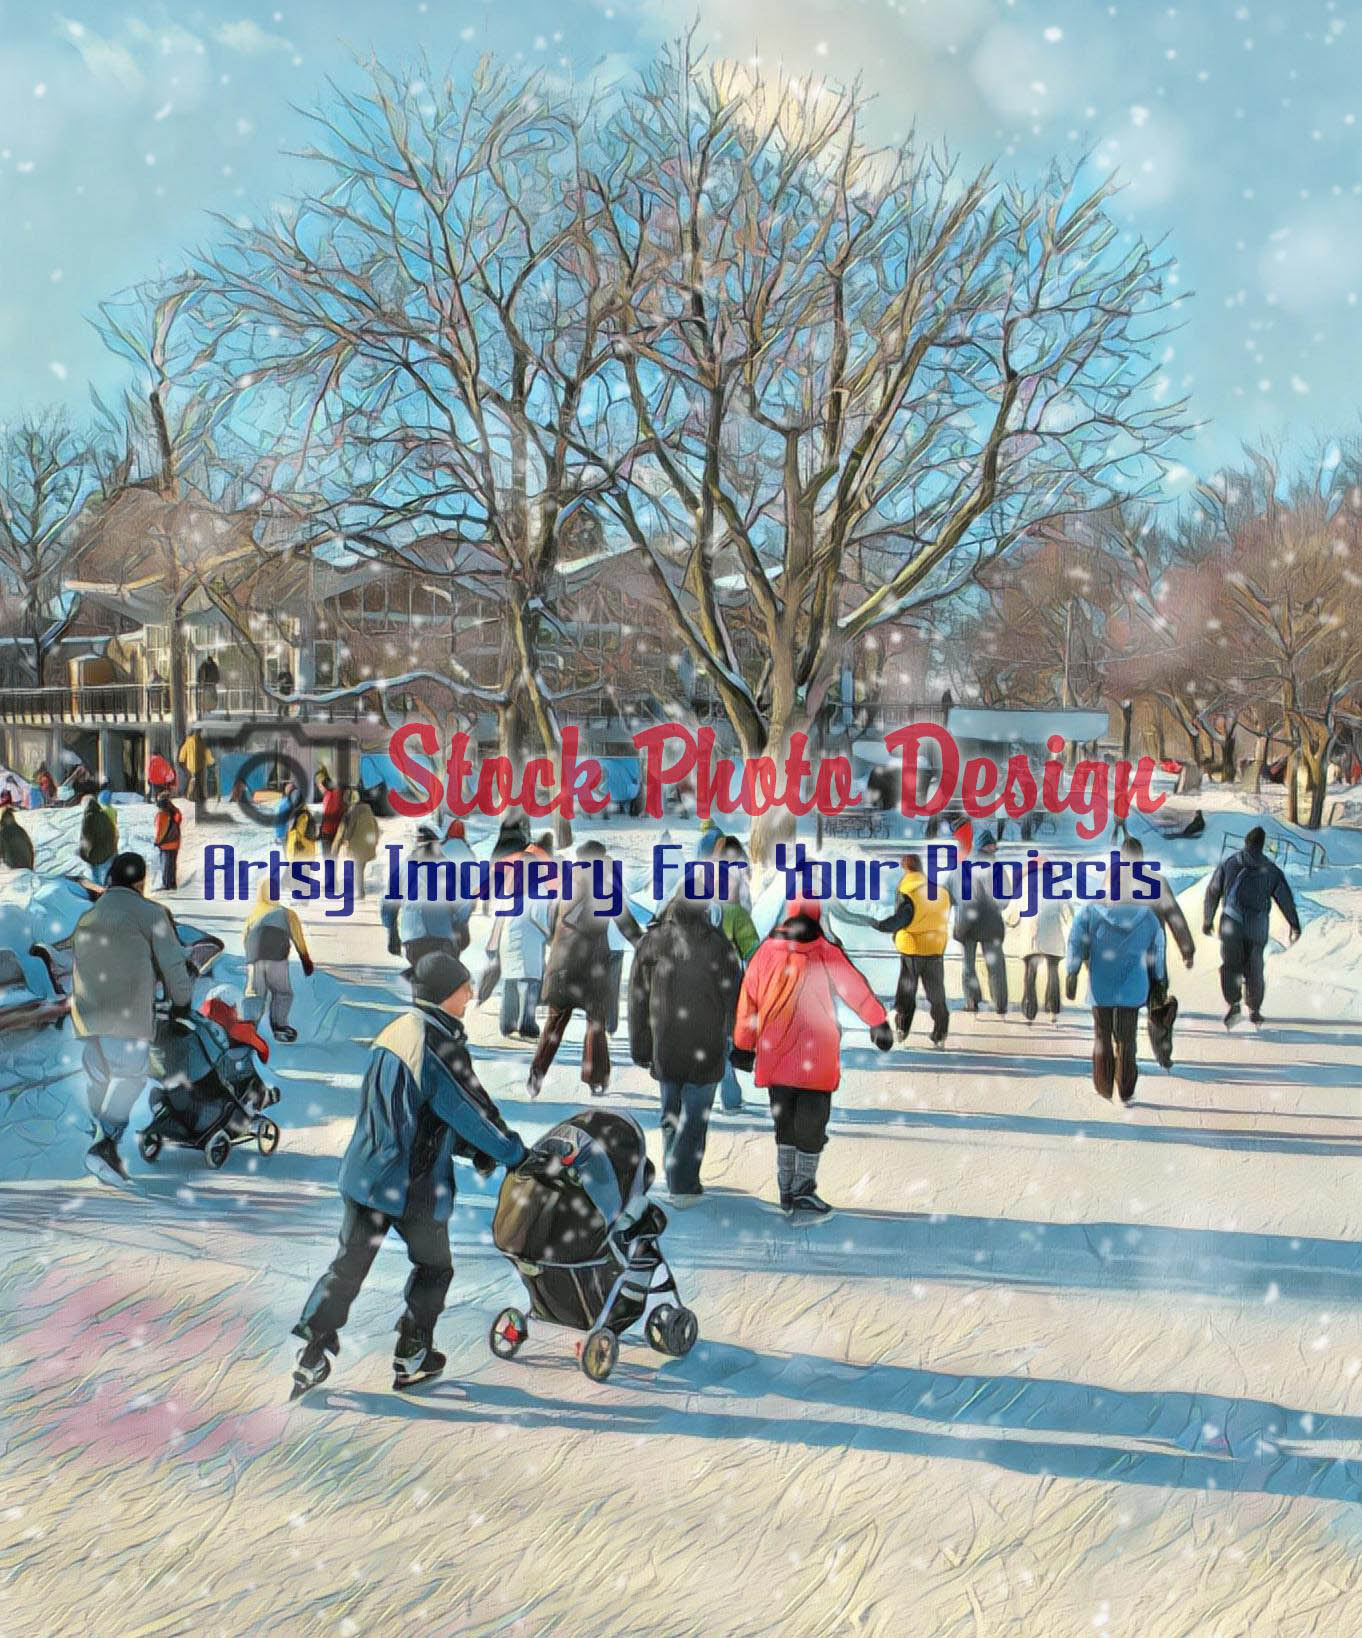 Skating Park with Snow 1 - Dimensions: 1362 by 1638 pixels